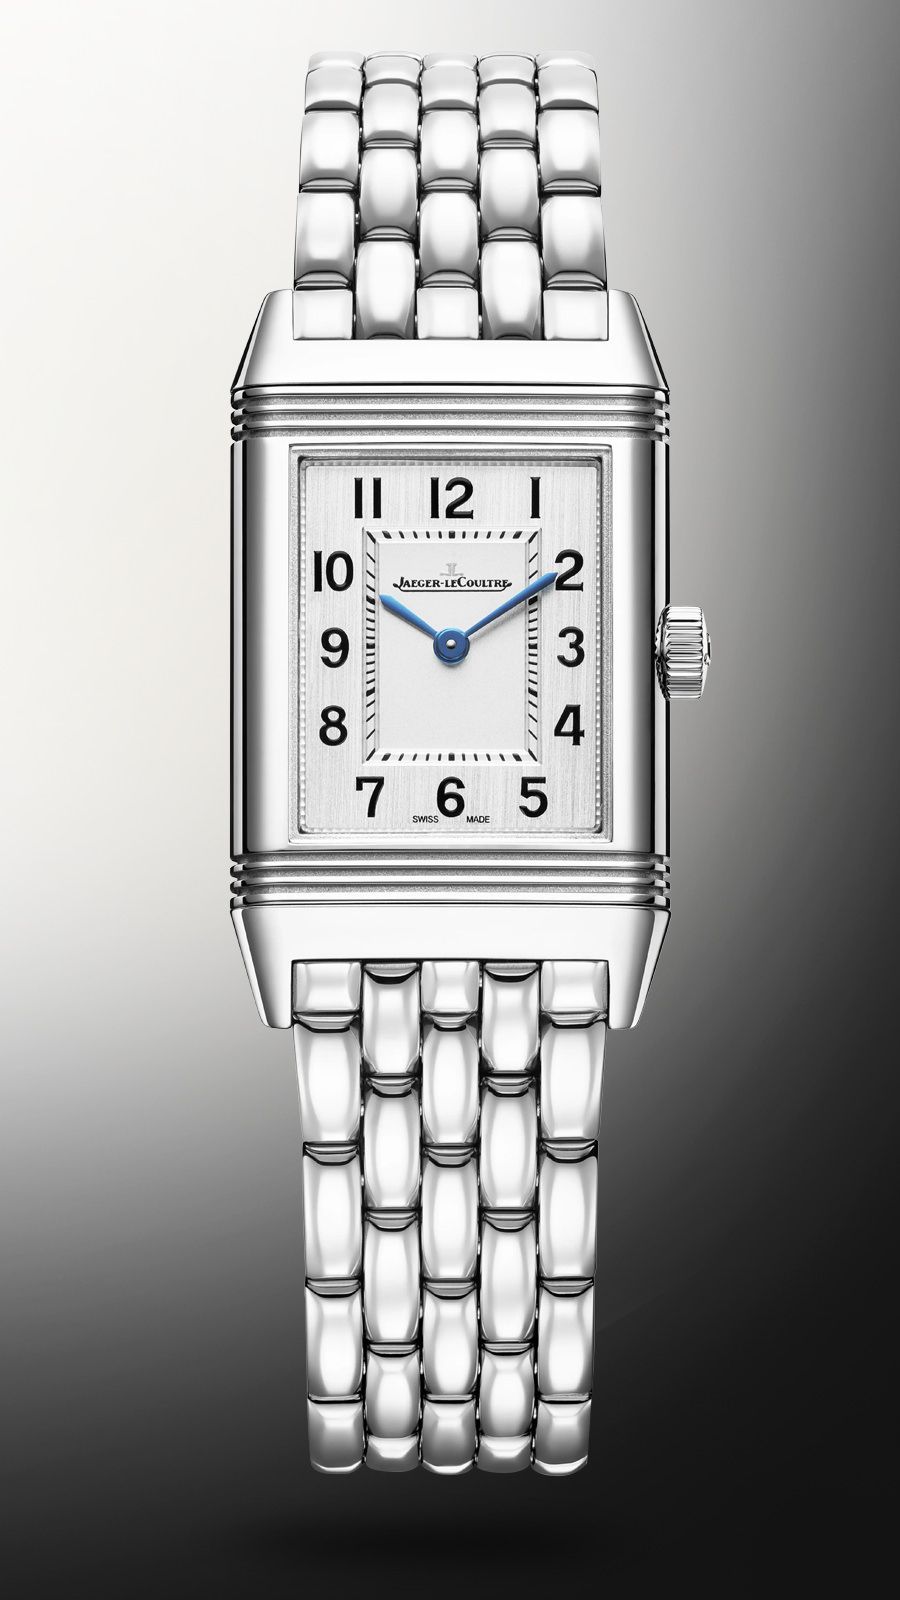 Jaeger-LeCoultre Reverso Classic Small Thin